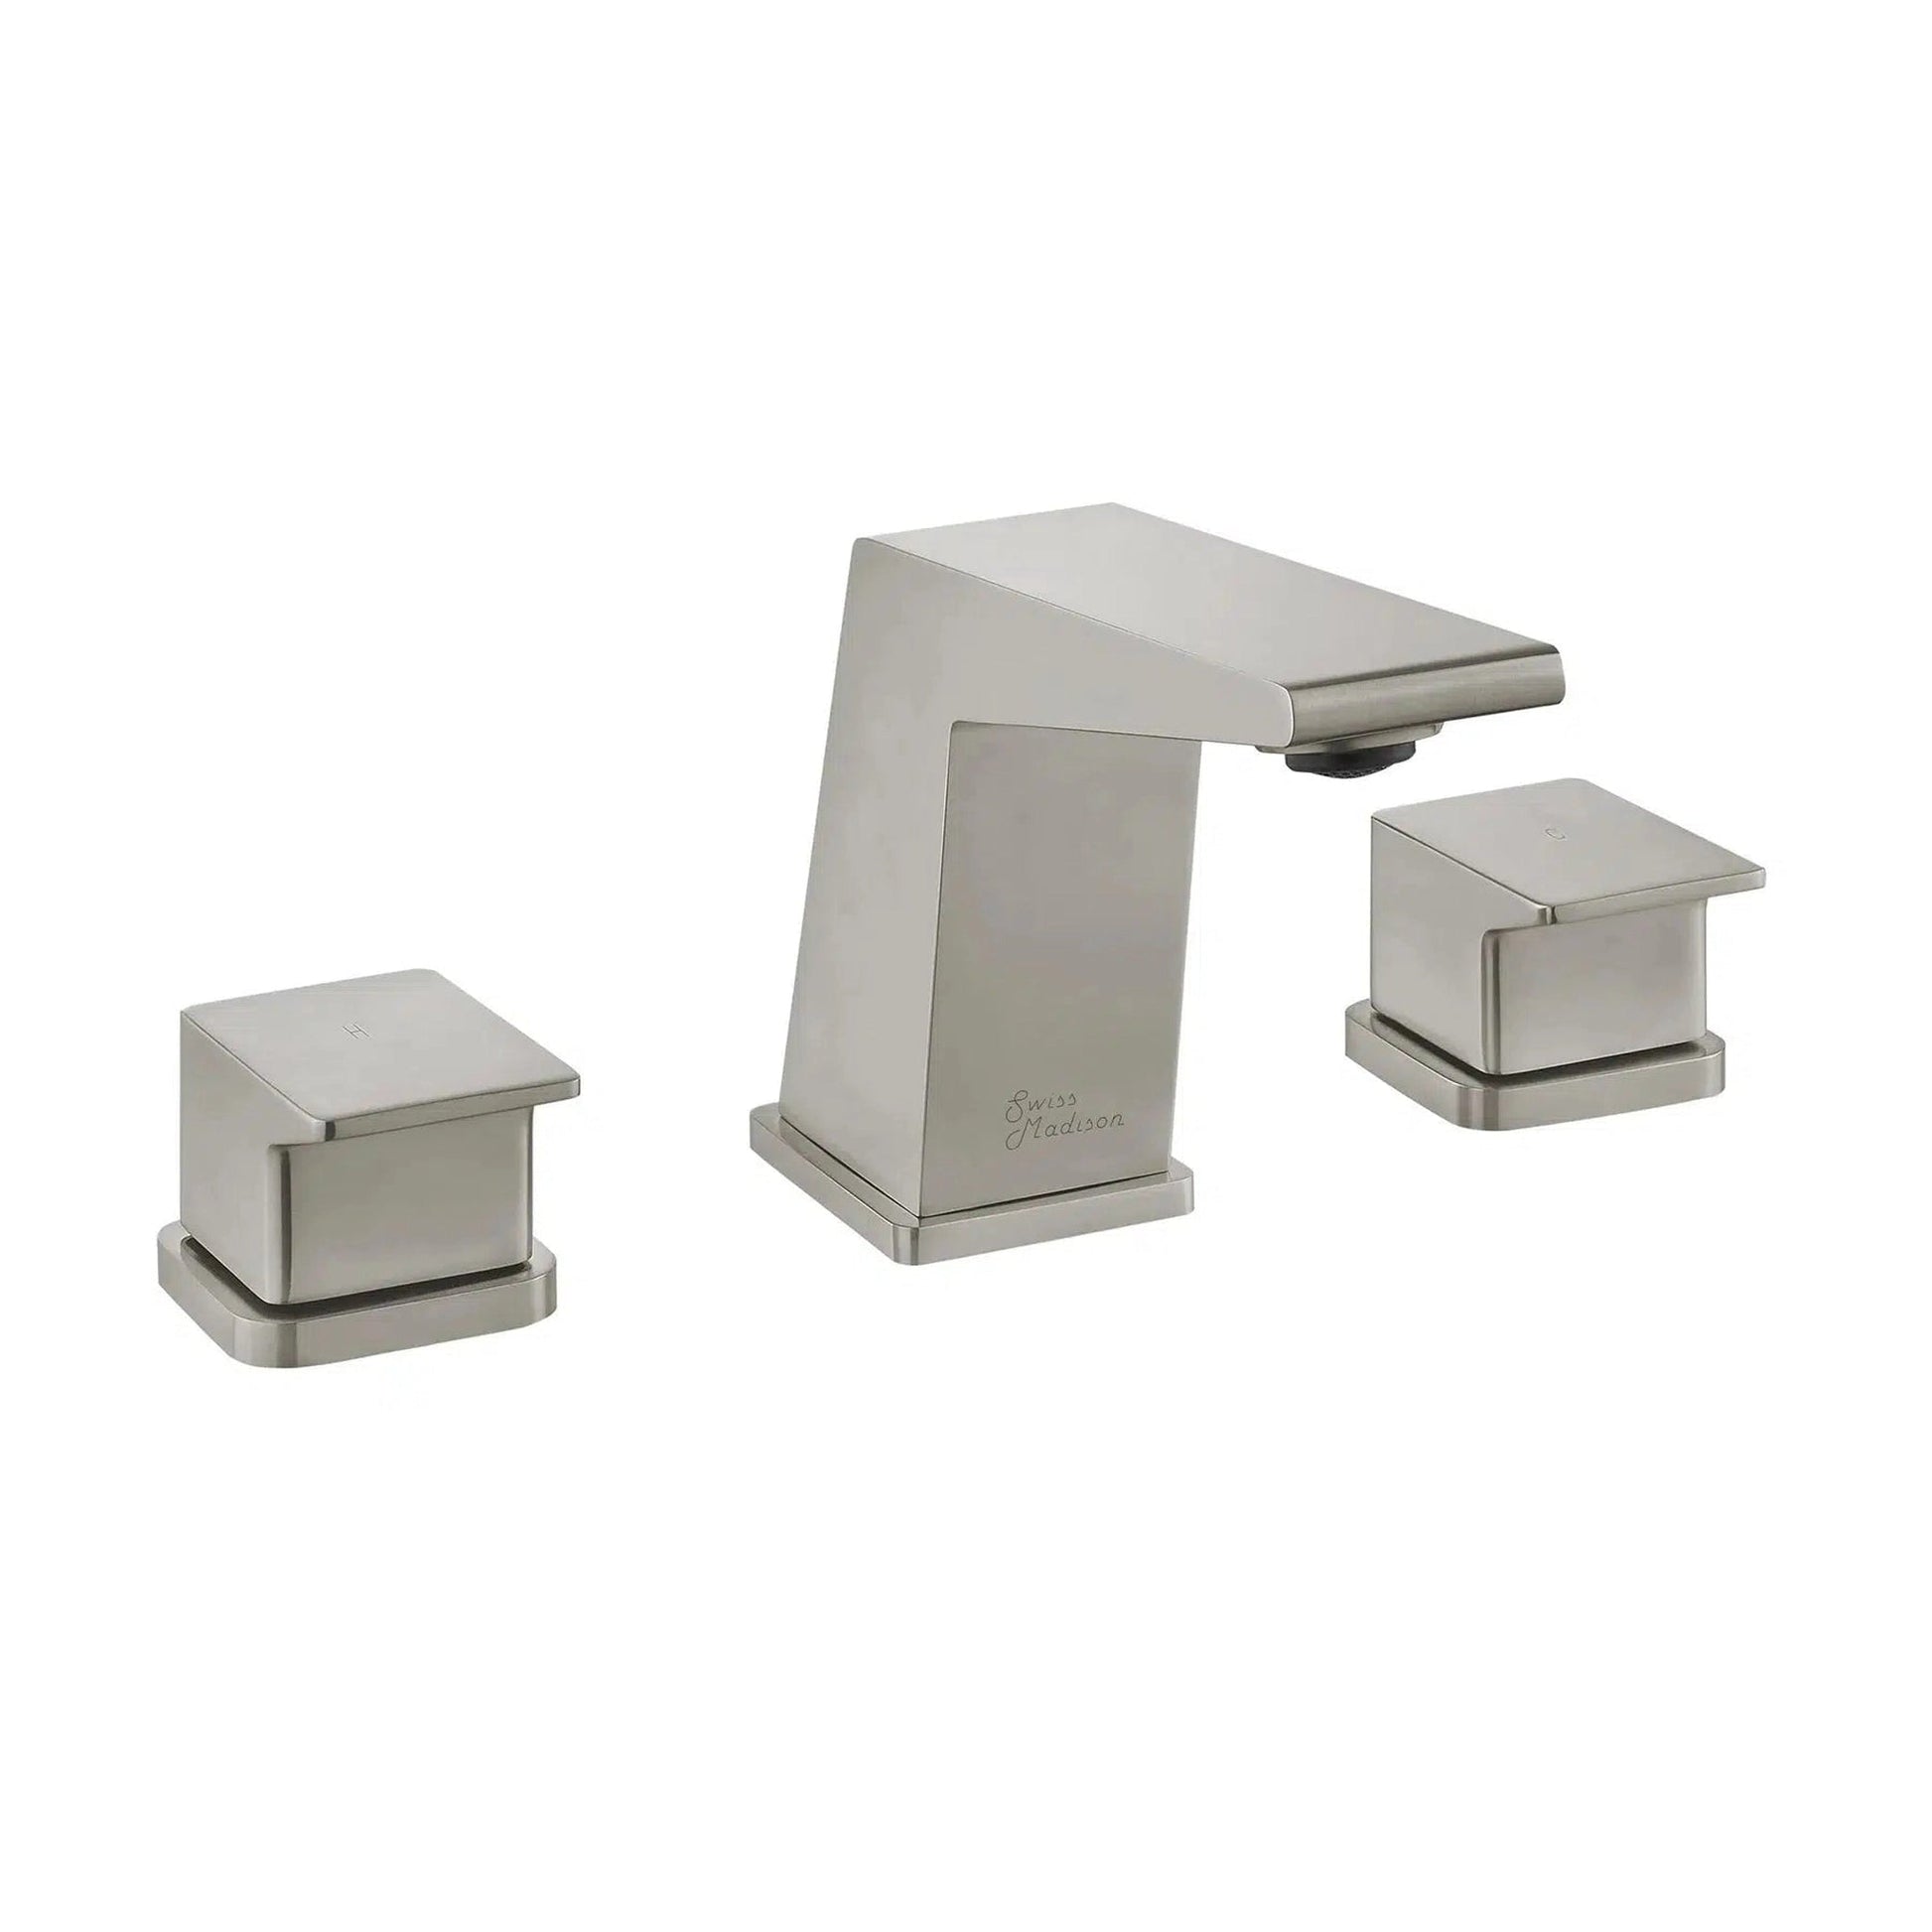 Swiss Madison Carré 8" Brushed Nickel Widespread Bathroom Faucet With Knob Handles and 1.2 GPM Flow Rate